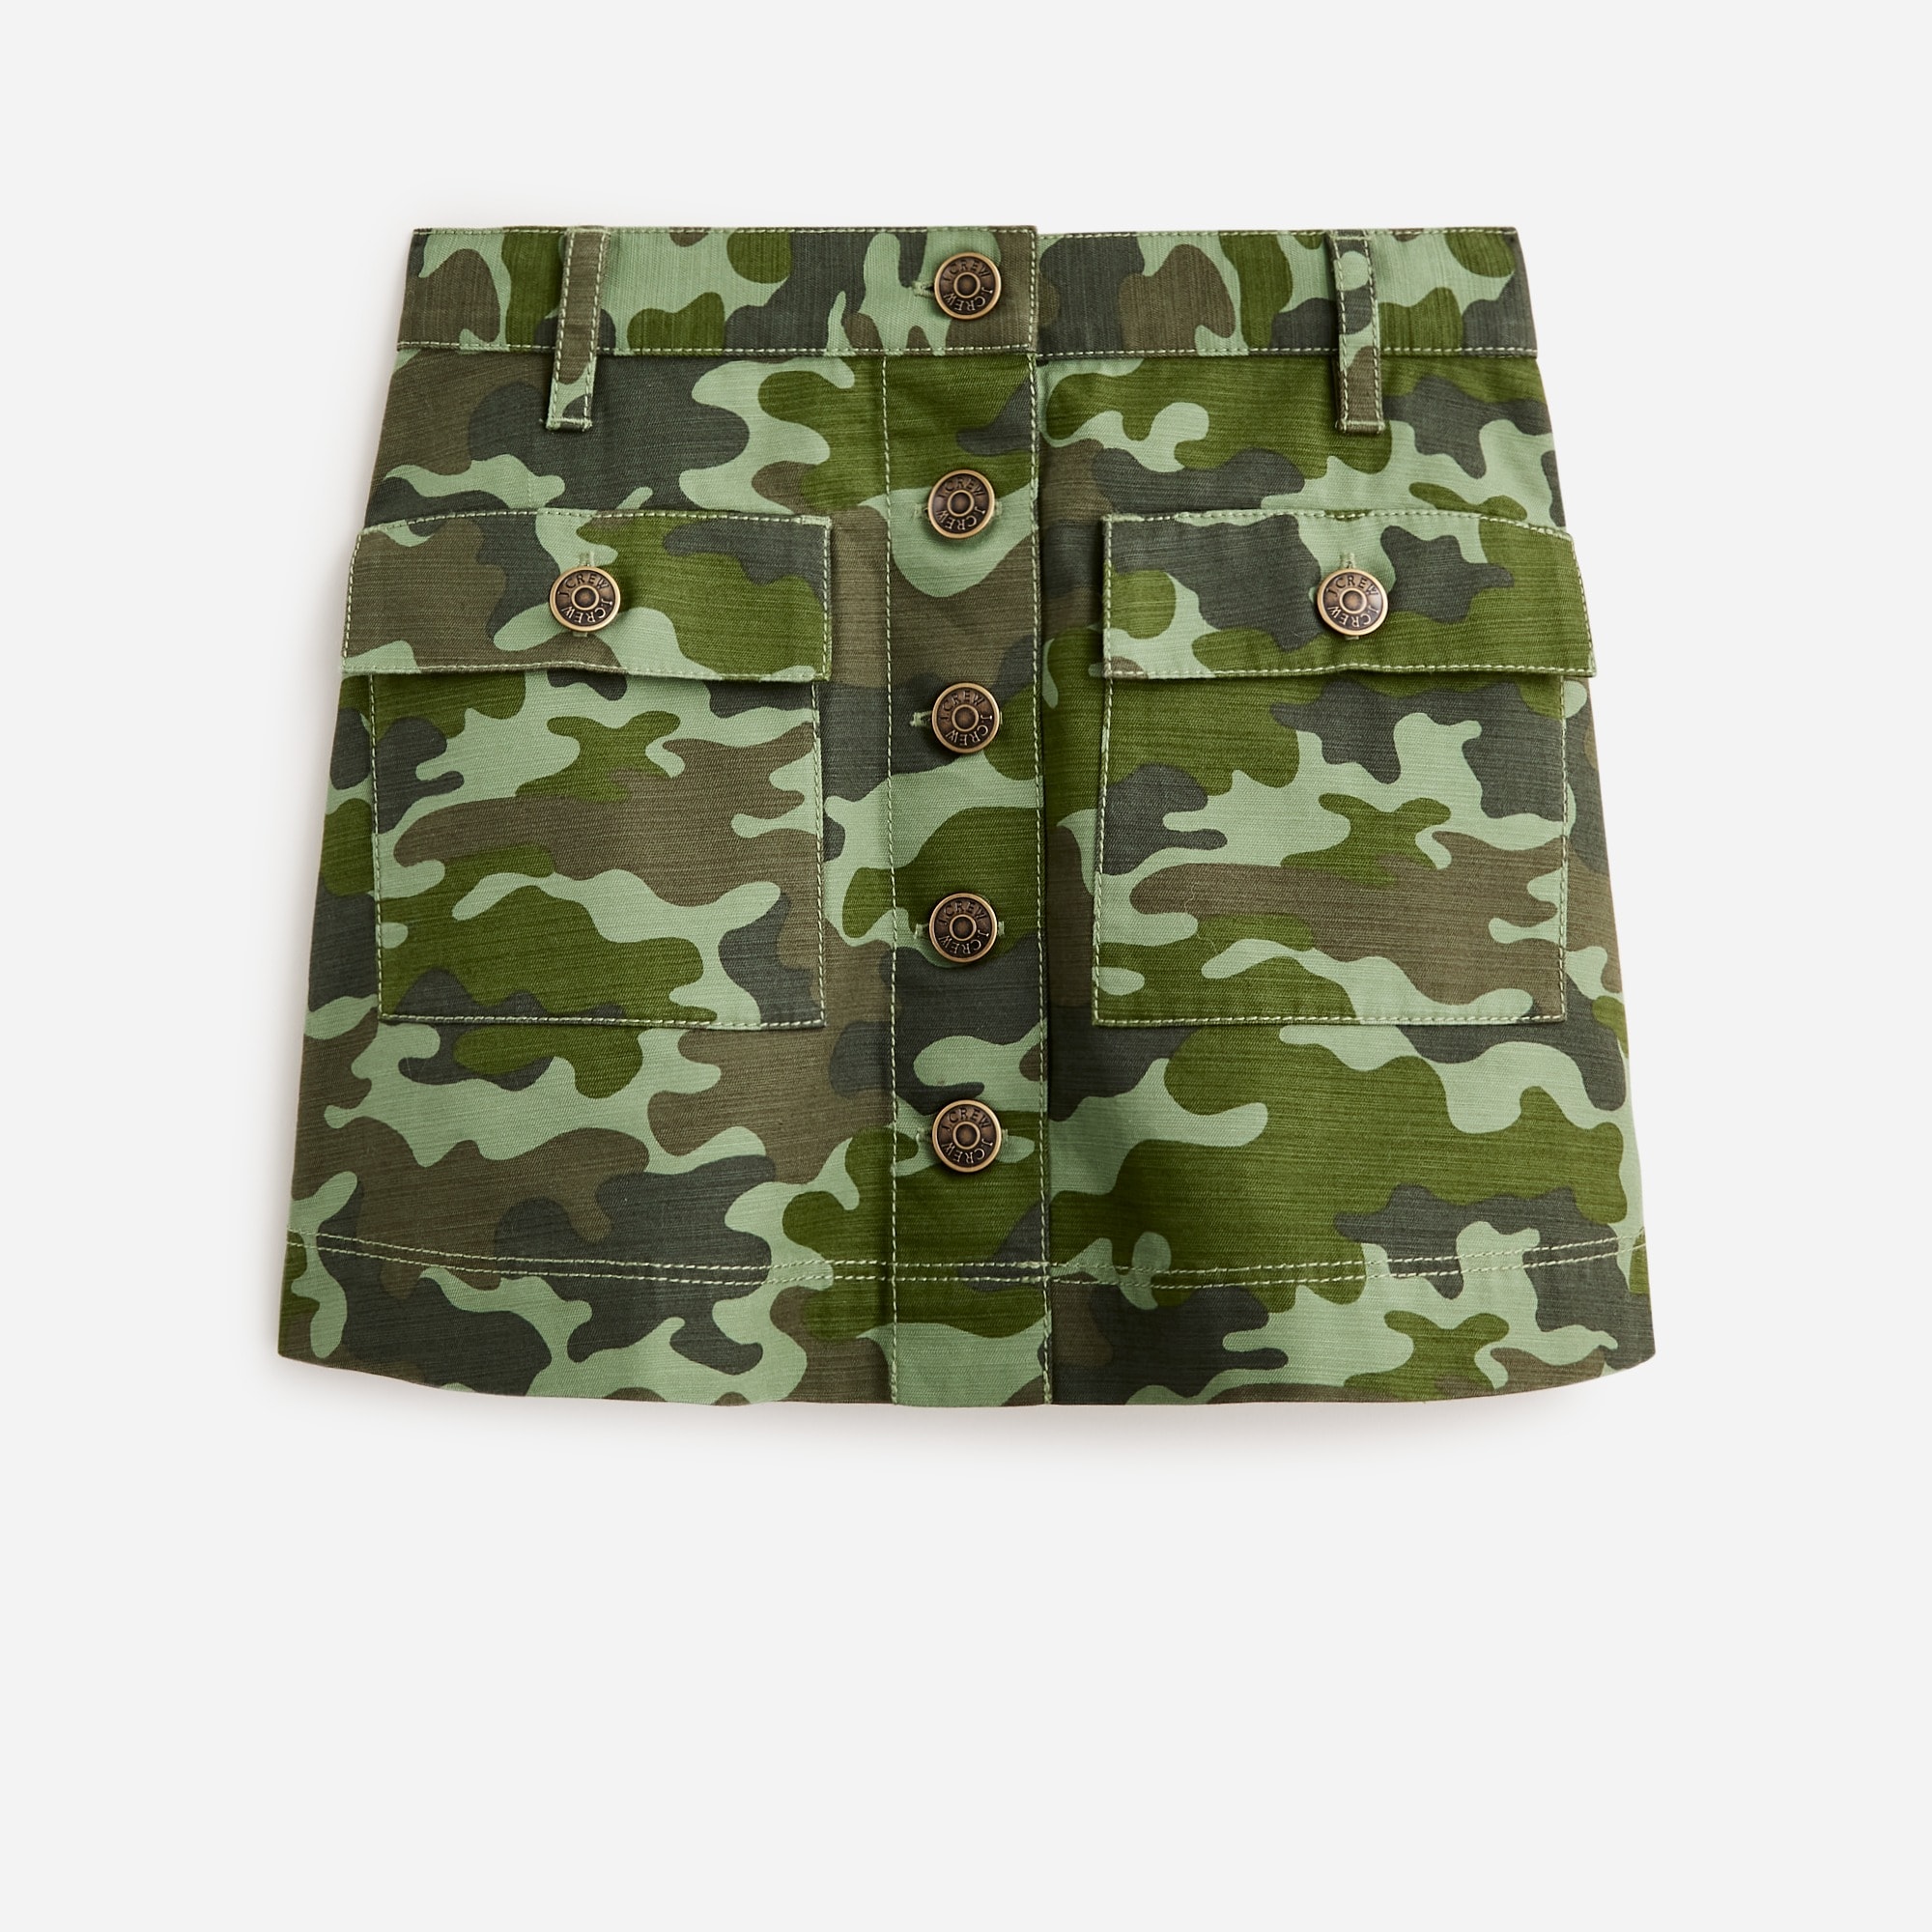  Girls' button-front skirt in camouflage